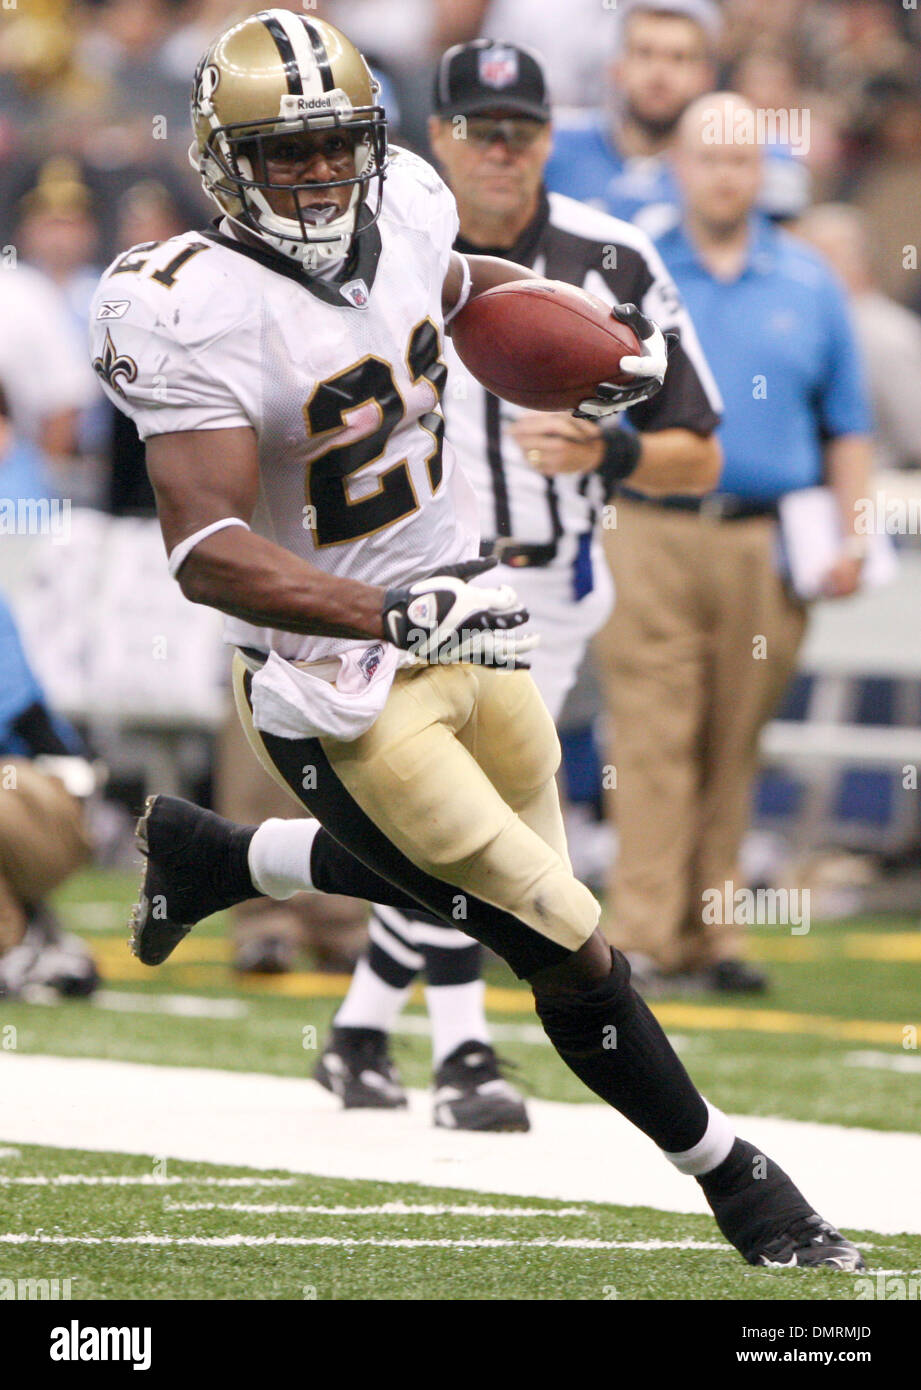 Saints running back Mike Bell (21). The New Orleans Saints